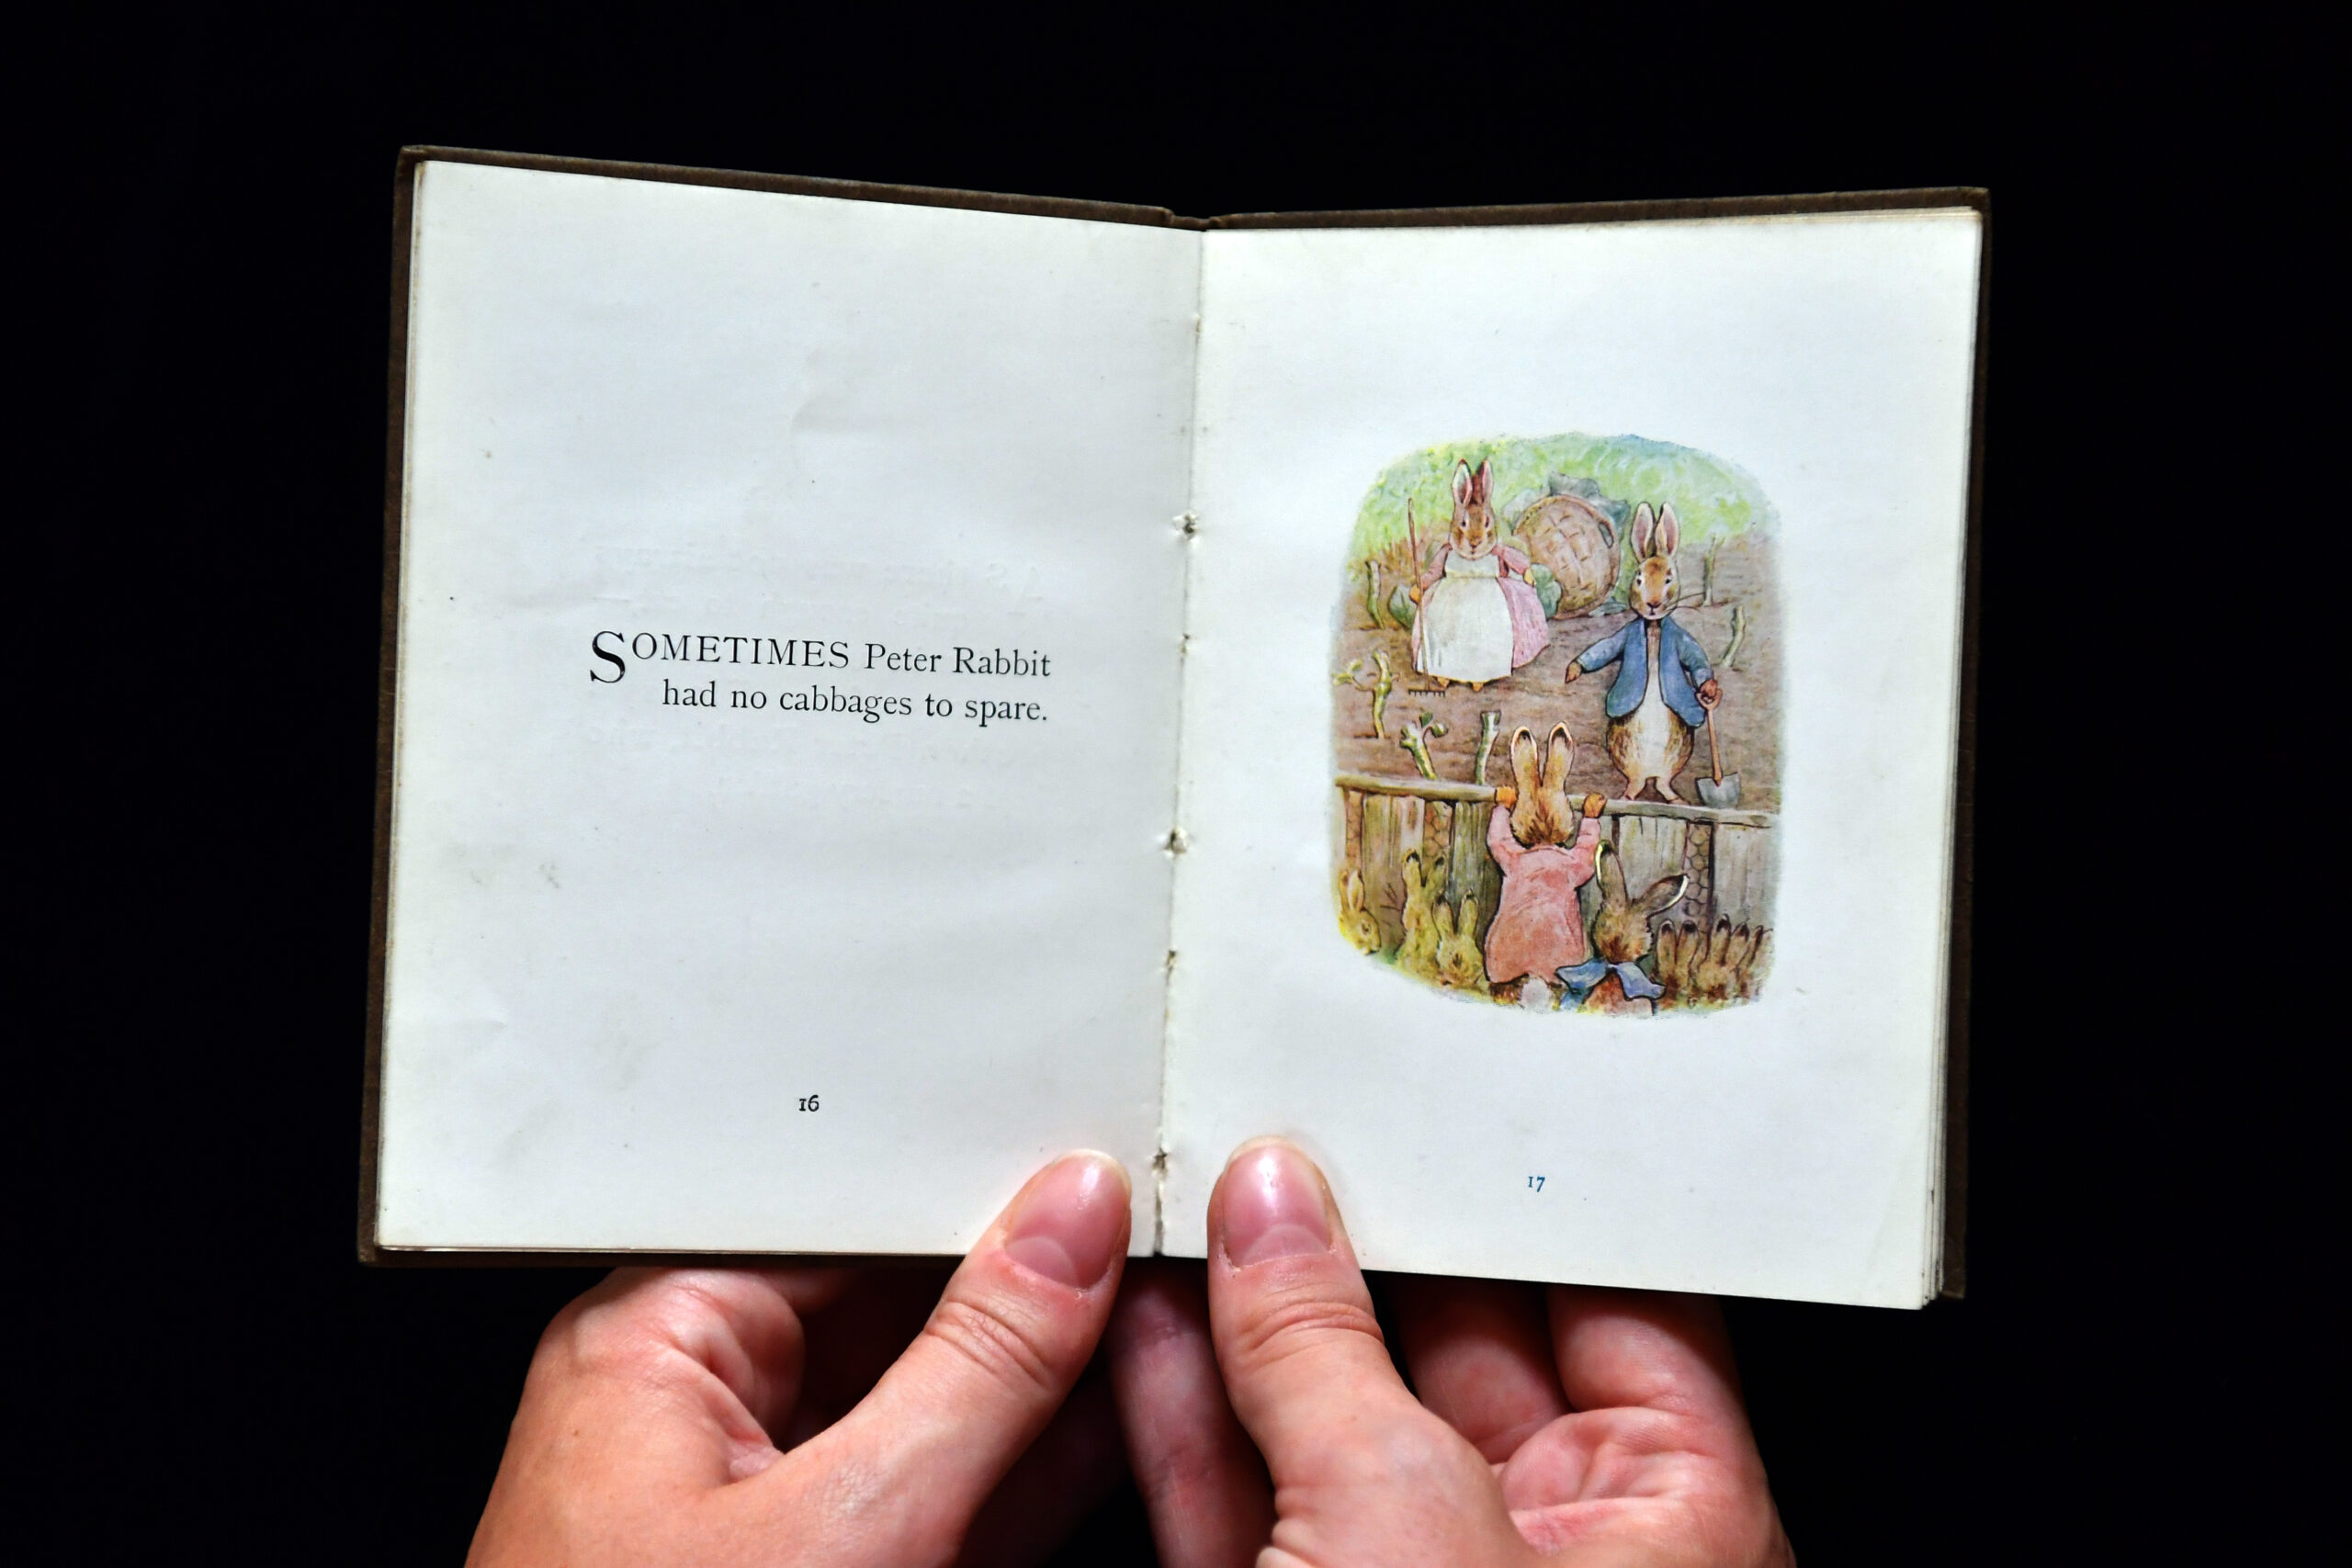 Highlights From The Beatrix Potter Auction Ahead Of Her 150th Anniversary